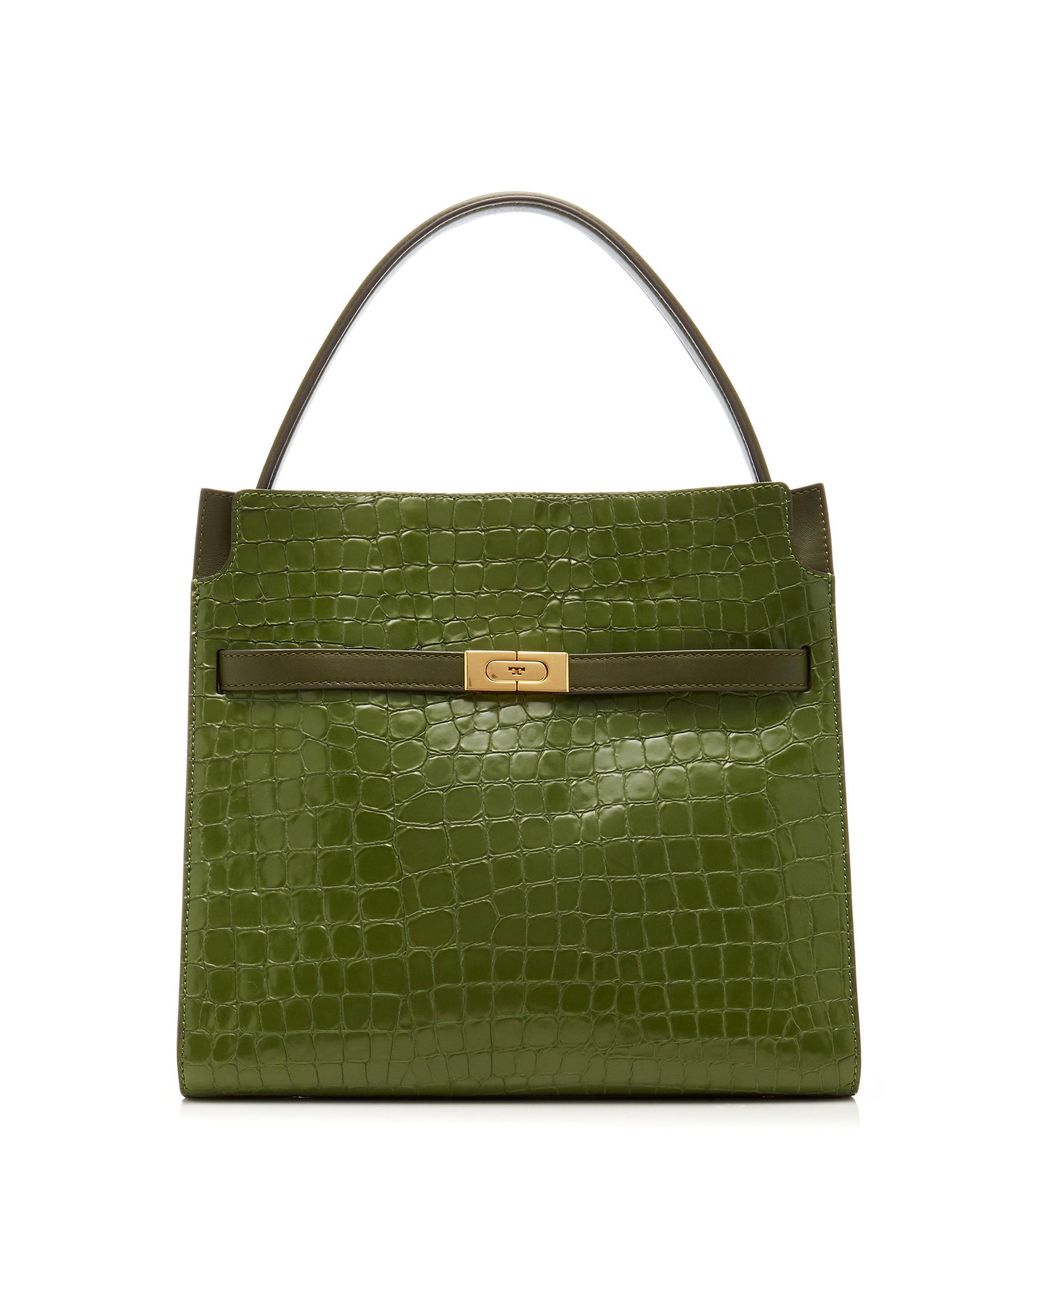 Tory Burch Lee Radziwill Embossed Leather Double Bag in Green | Lyst